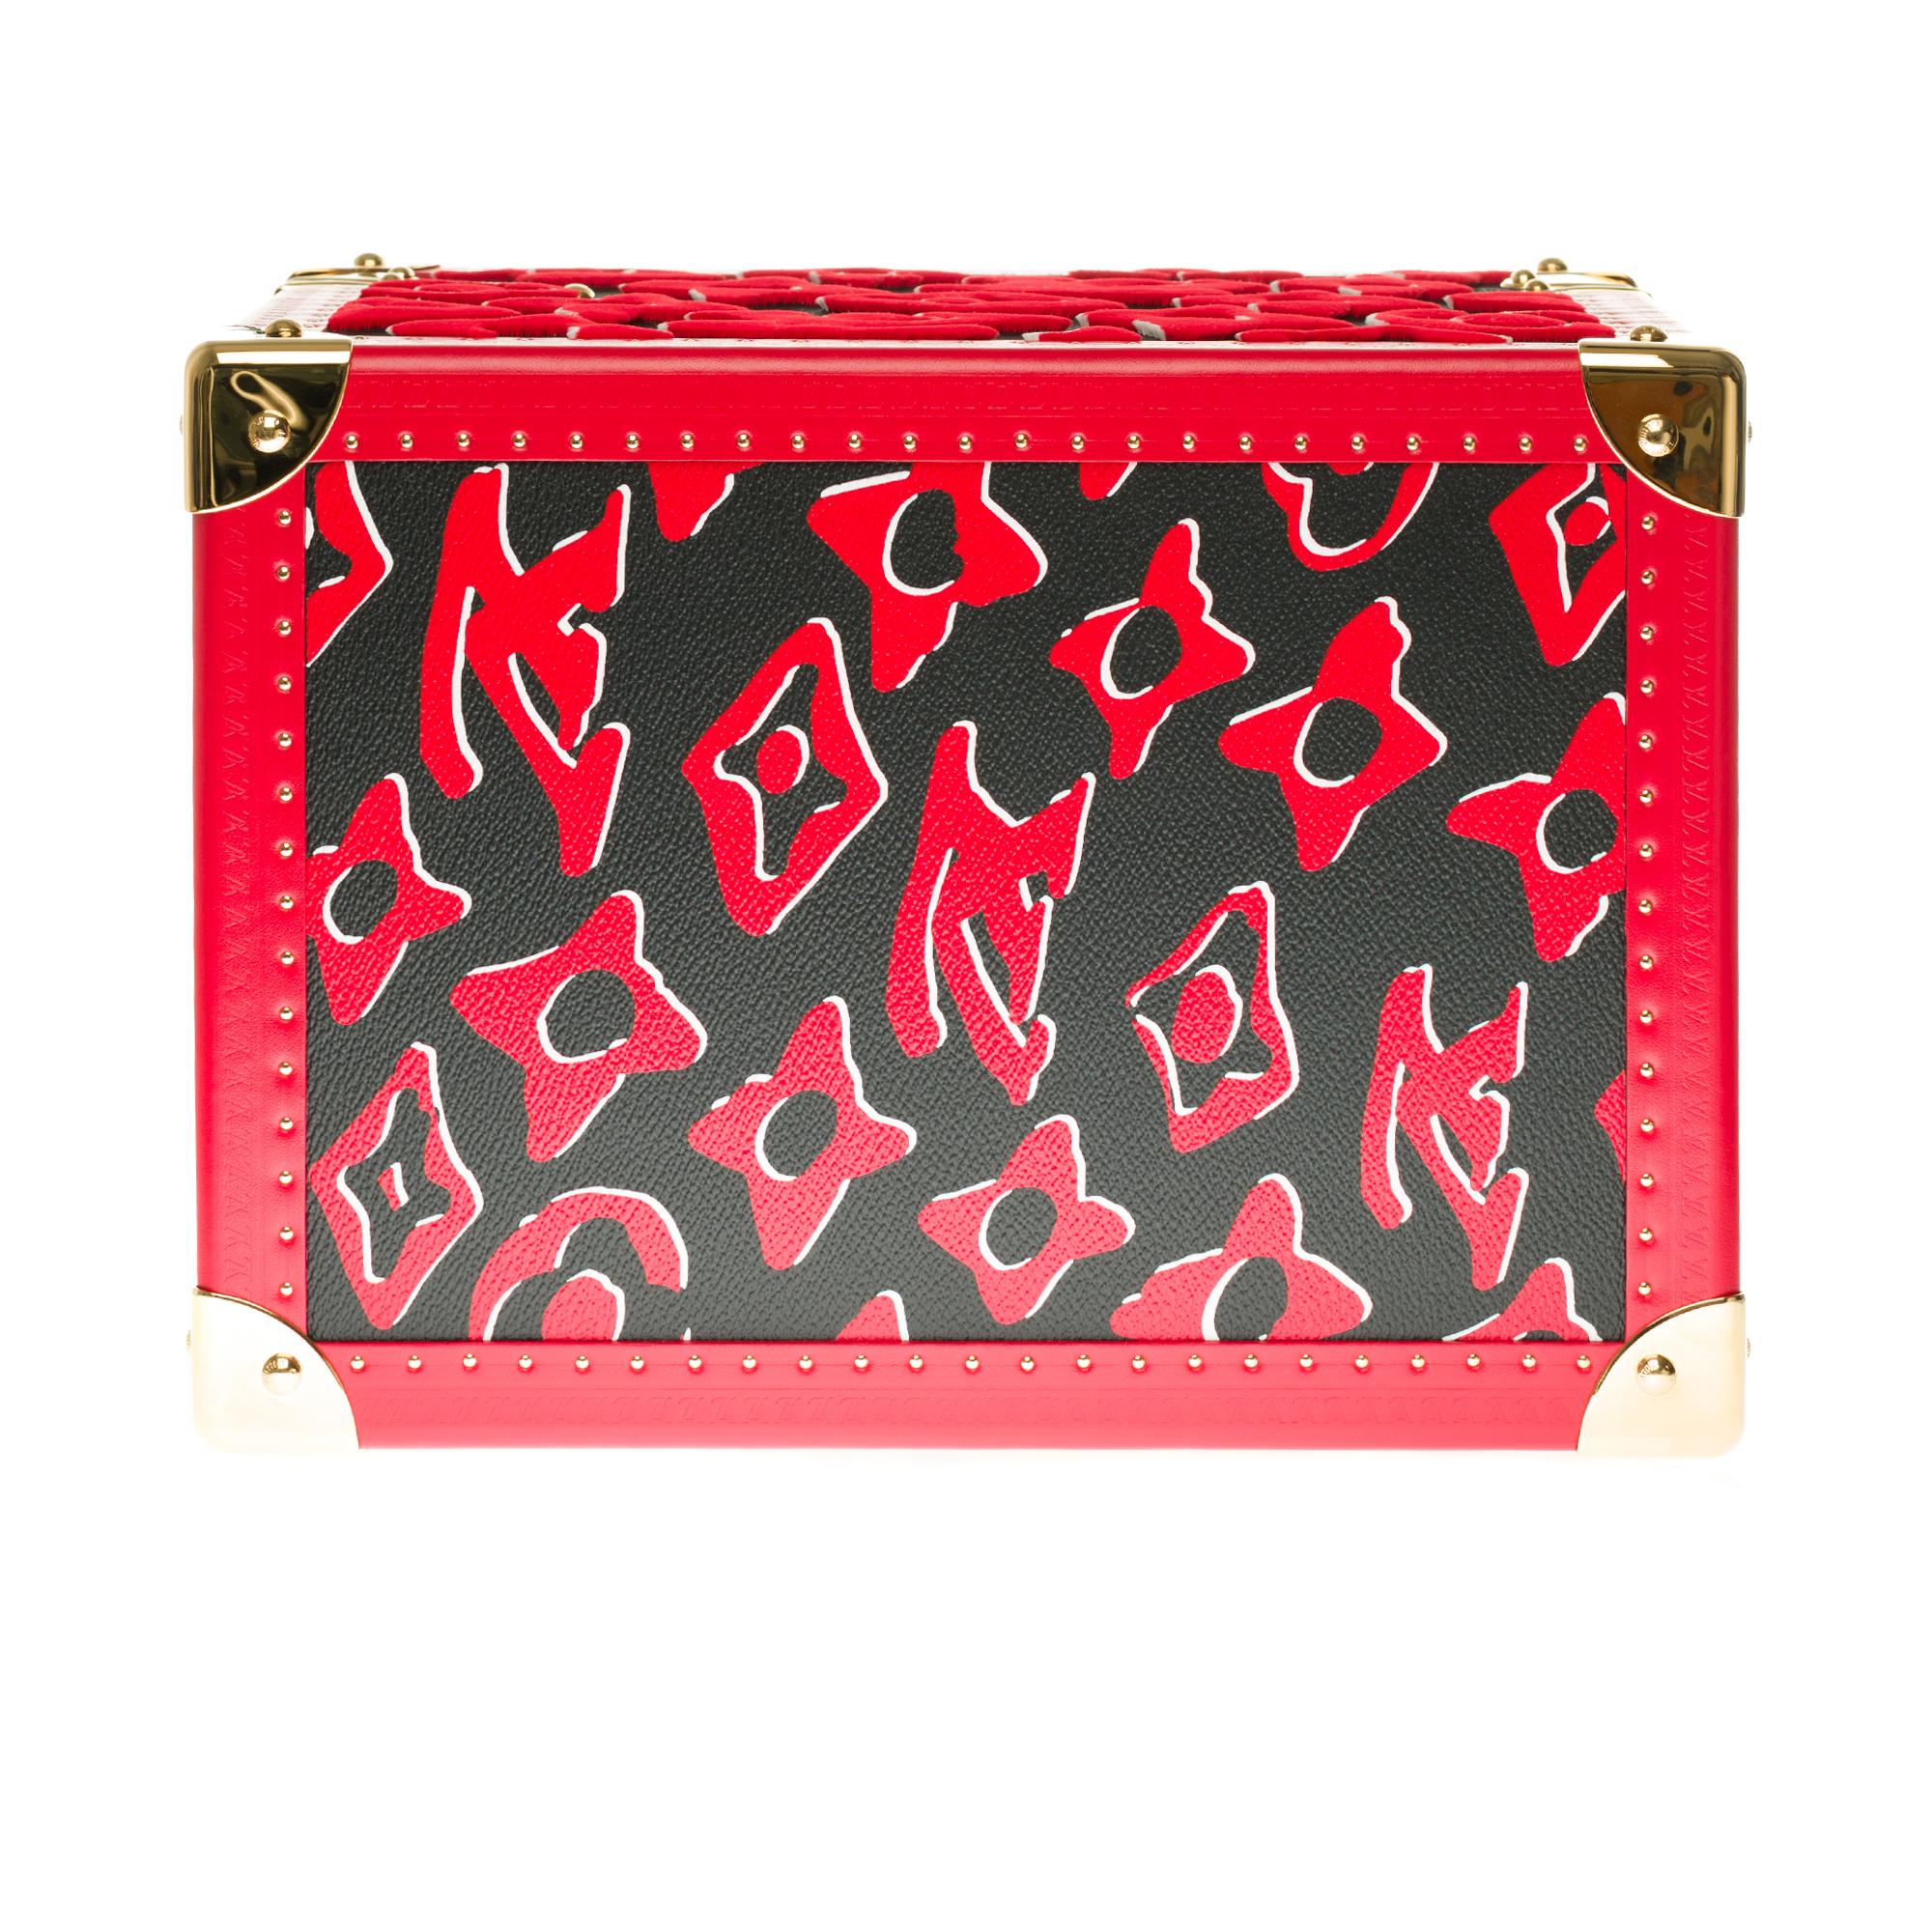 Ultra limited/Few pieces in the world/Louis Vuitton Vanity Case in red Tufa 5